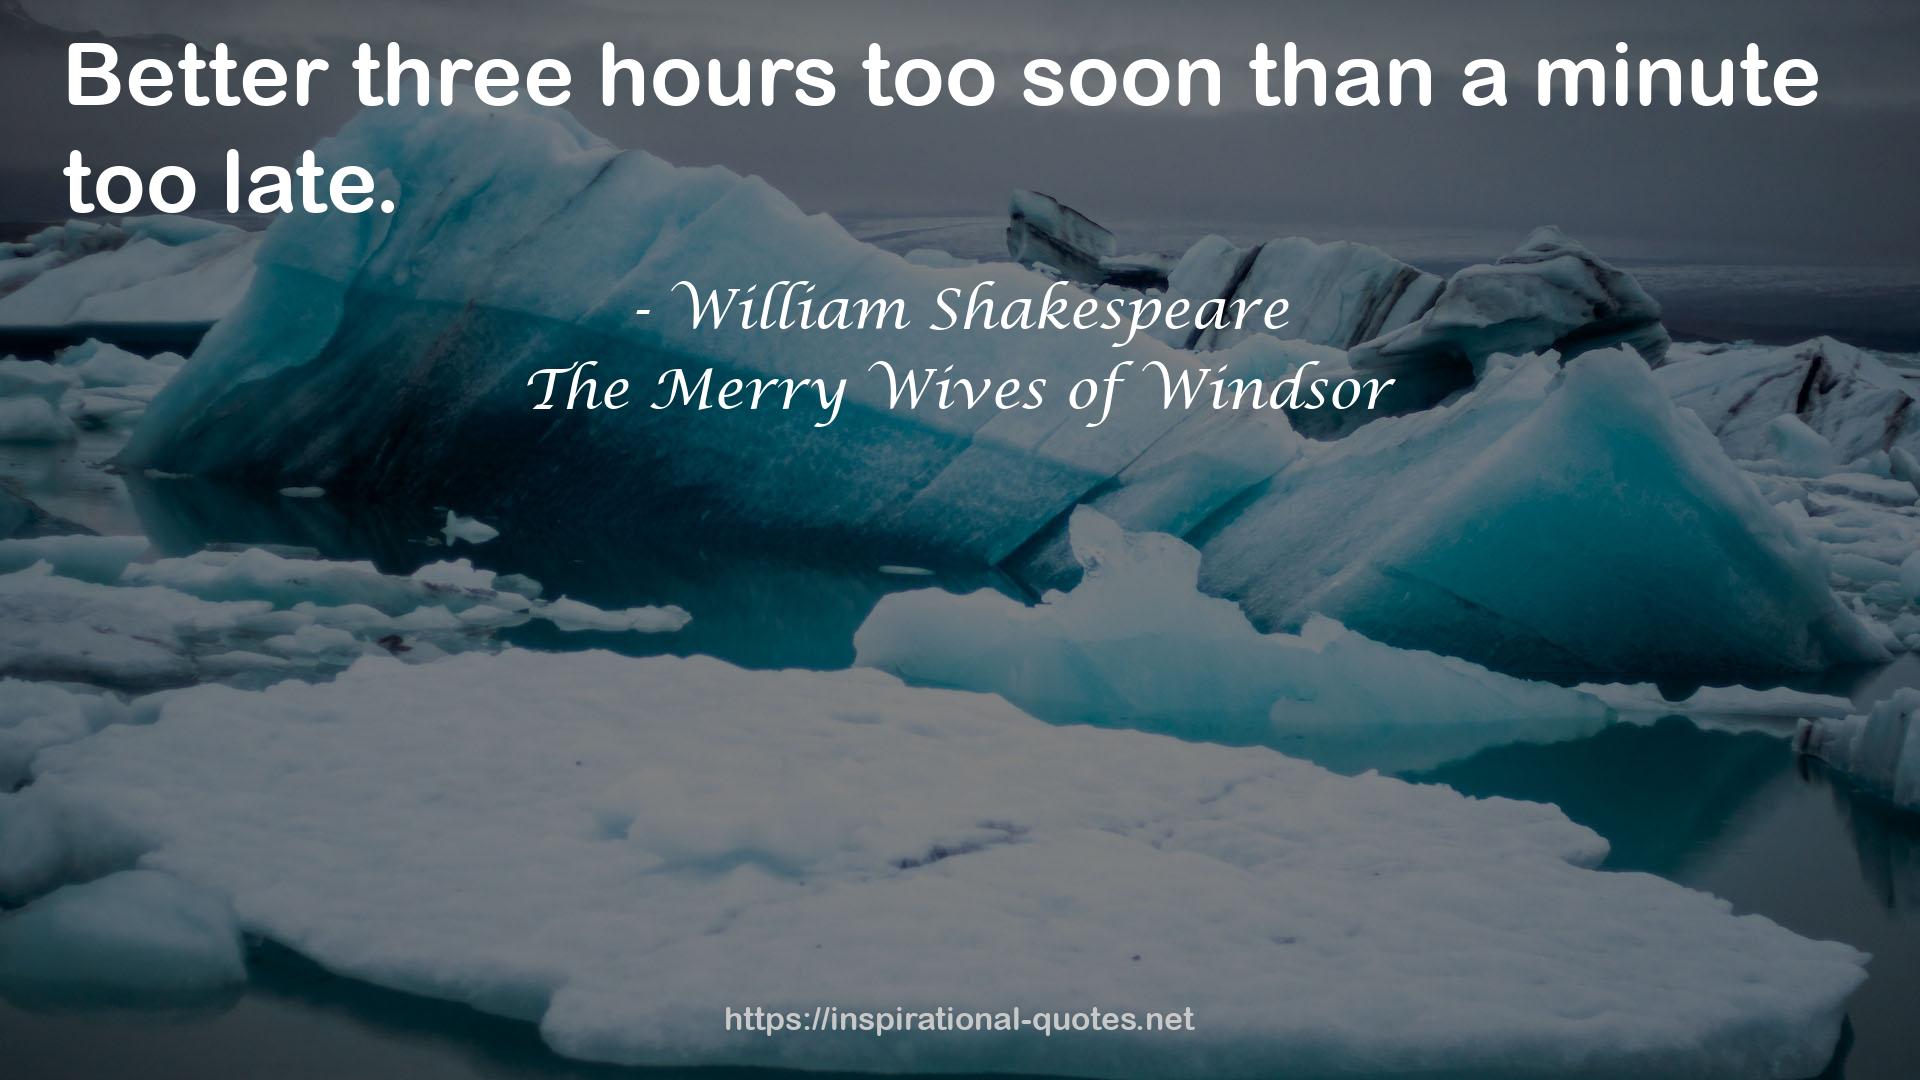 The Merry Wives of Windsor QUOTES